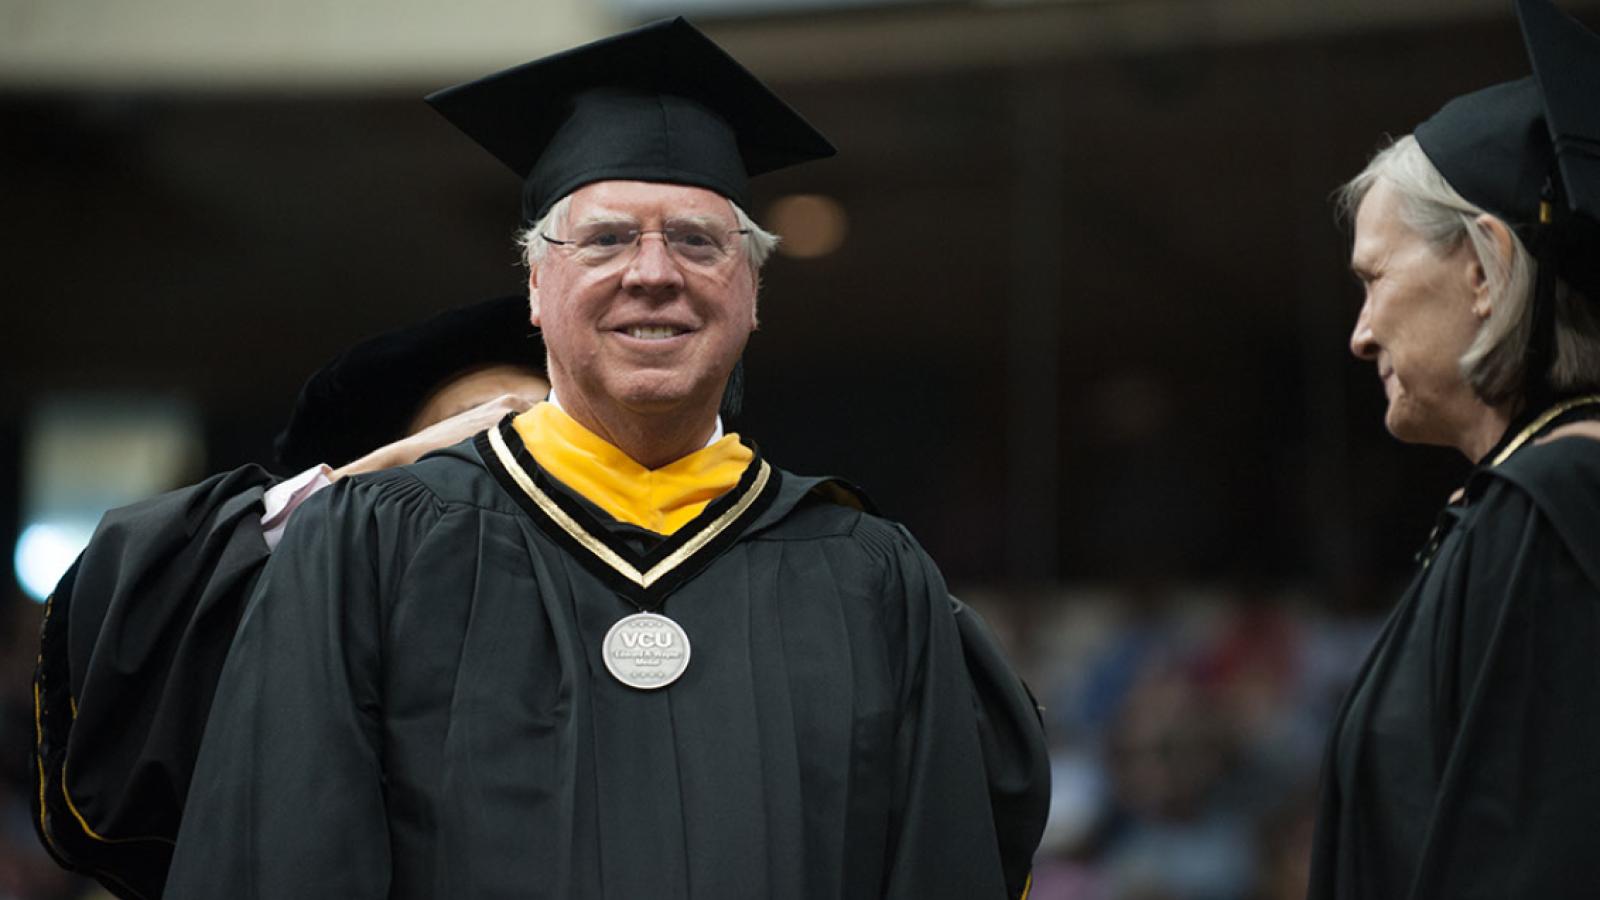 Charles Crone receives the Edward A. Wayne Medal at VCU's commencement on May 12.